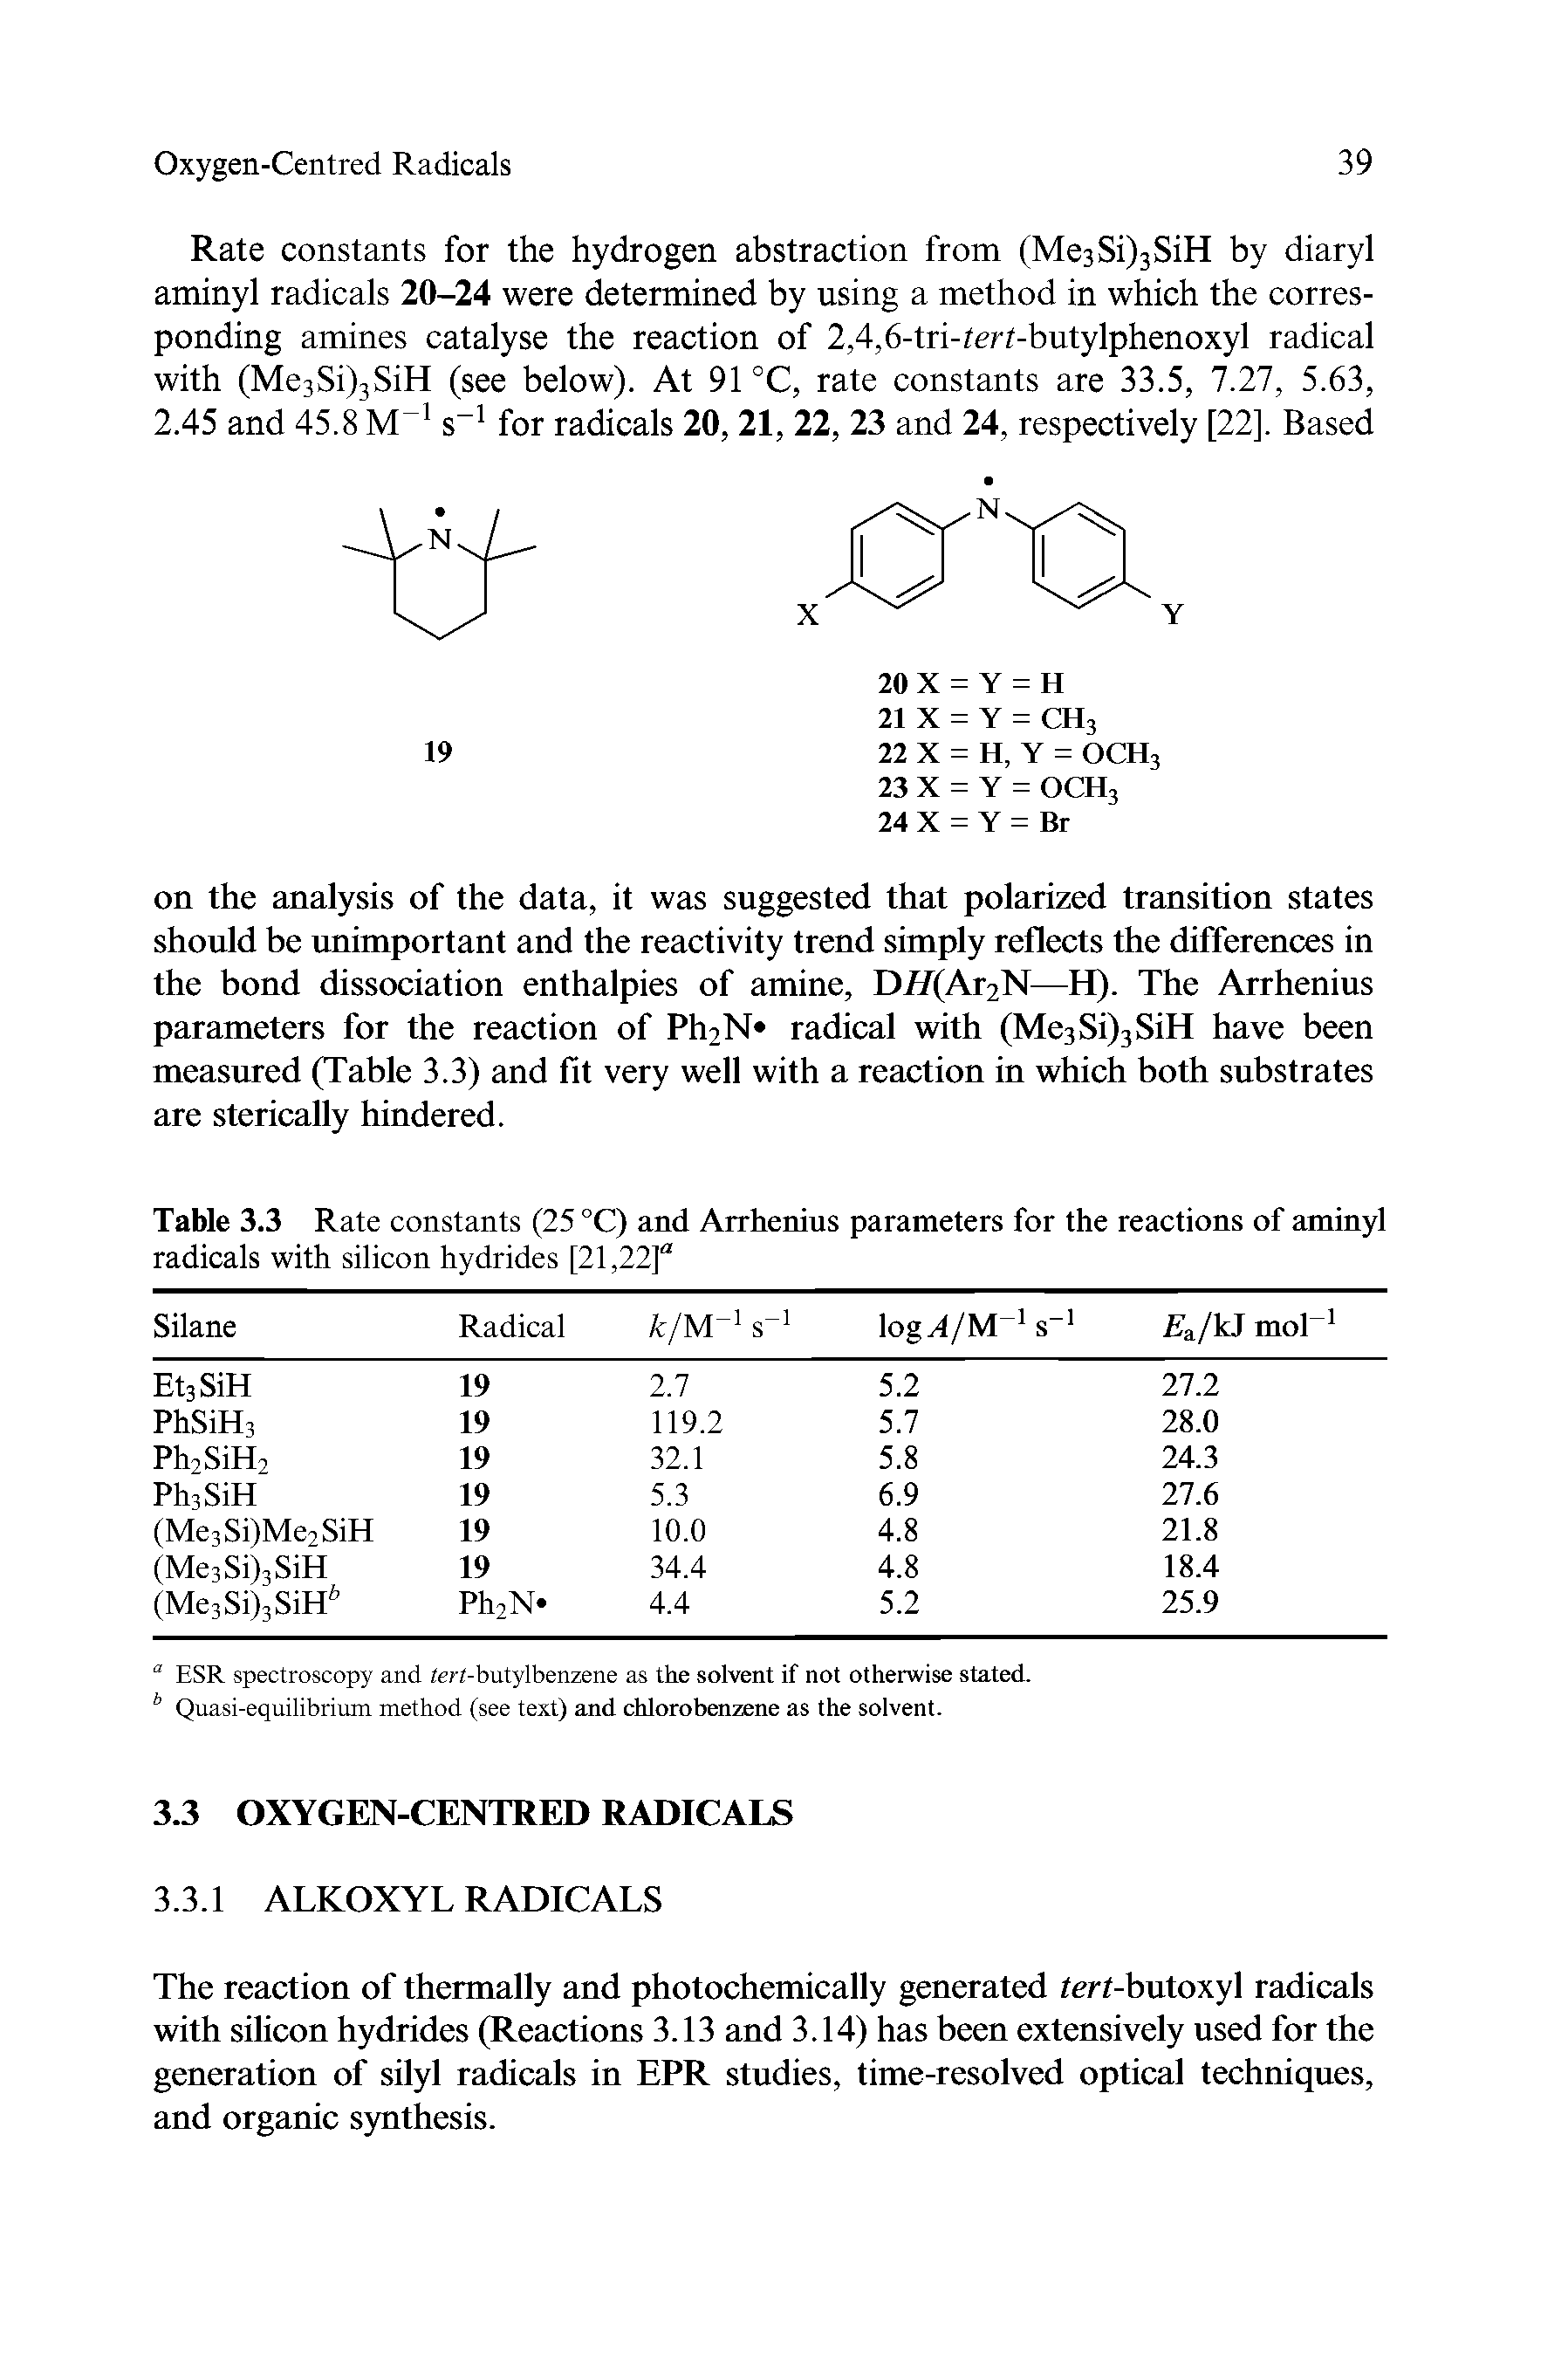 Table 3.3 Rate constants (25 °C) and Arrhenius parameters for the reactions of aminyl radicals with silicon hydrides [21,22] ...